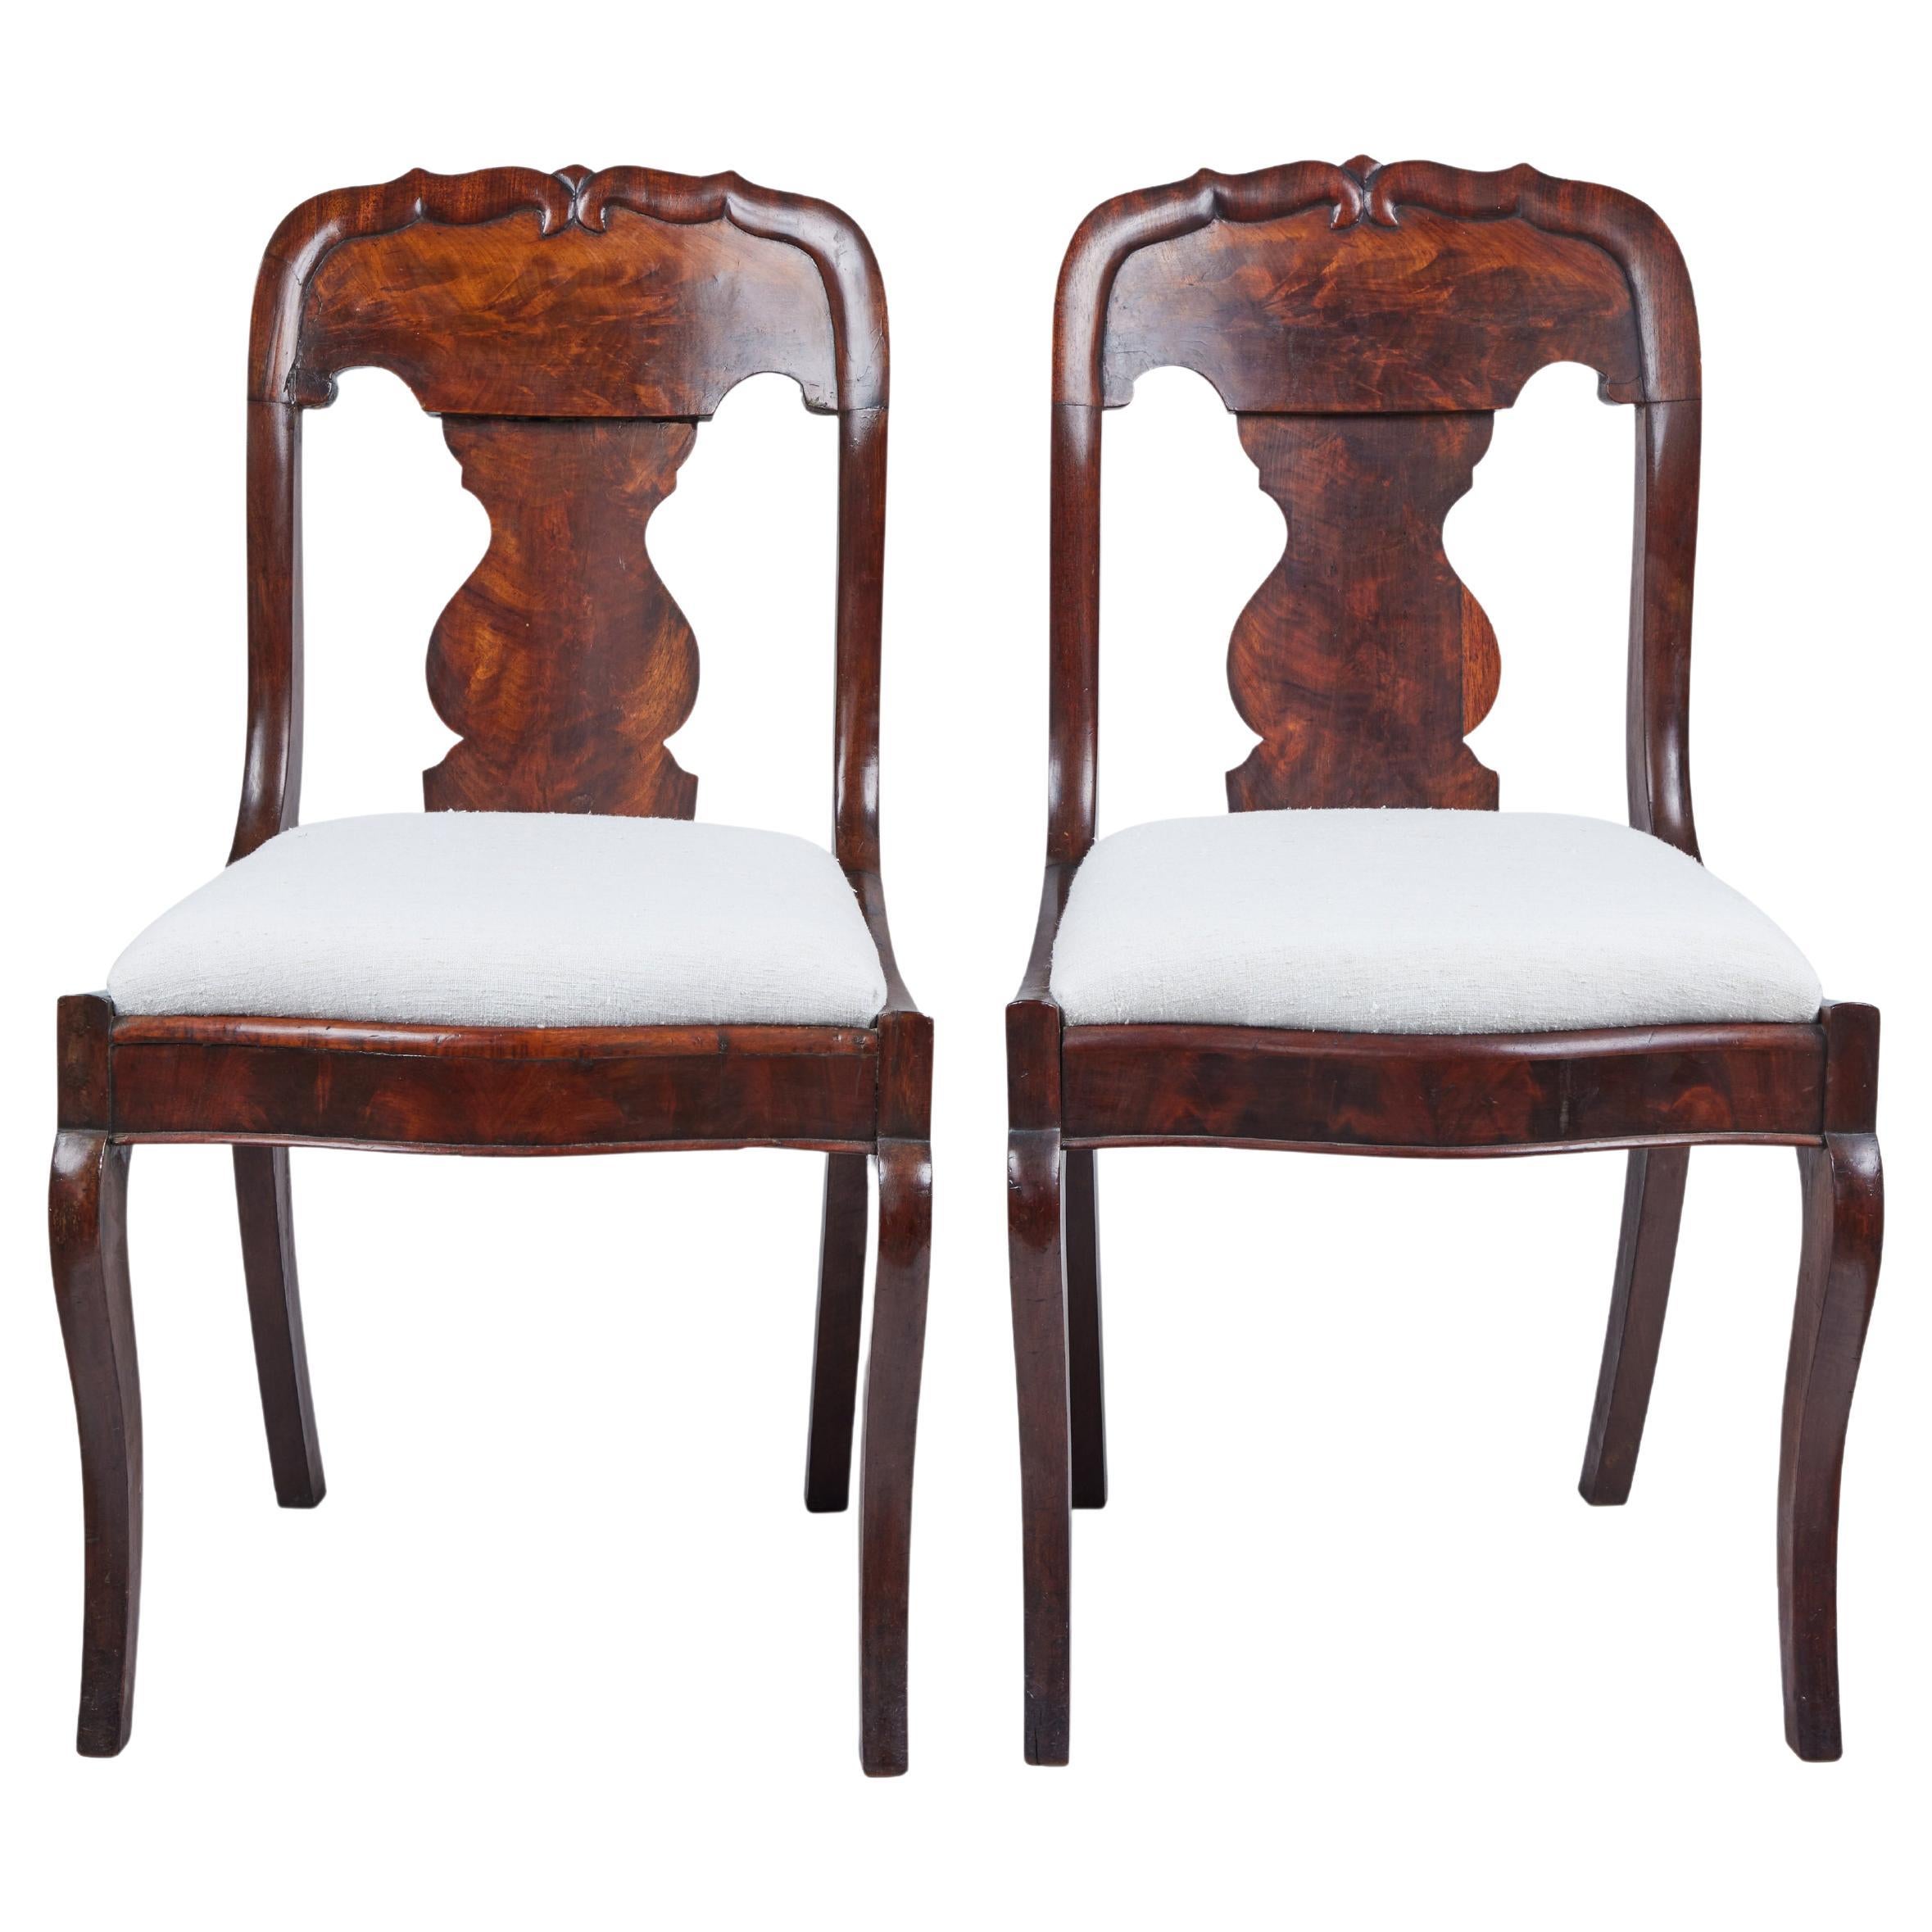 Antique Queen Anne Style Walnut Burl Wood Chairs Pair For Sale